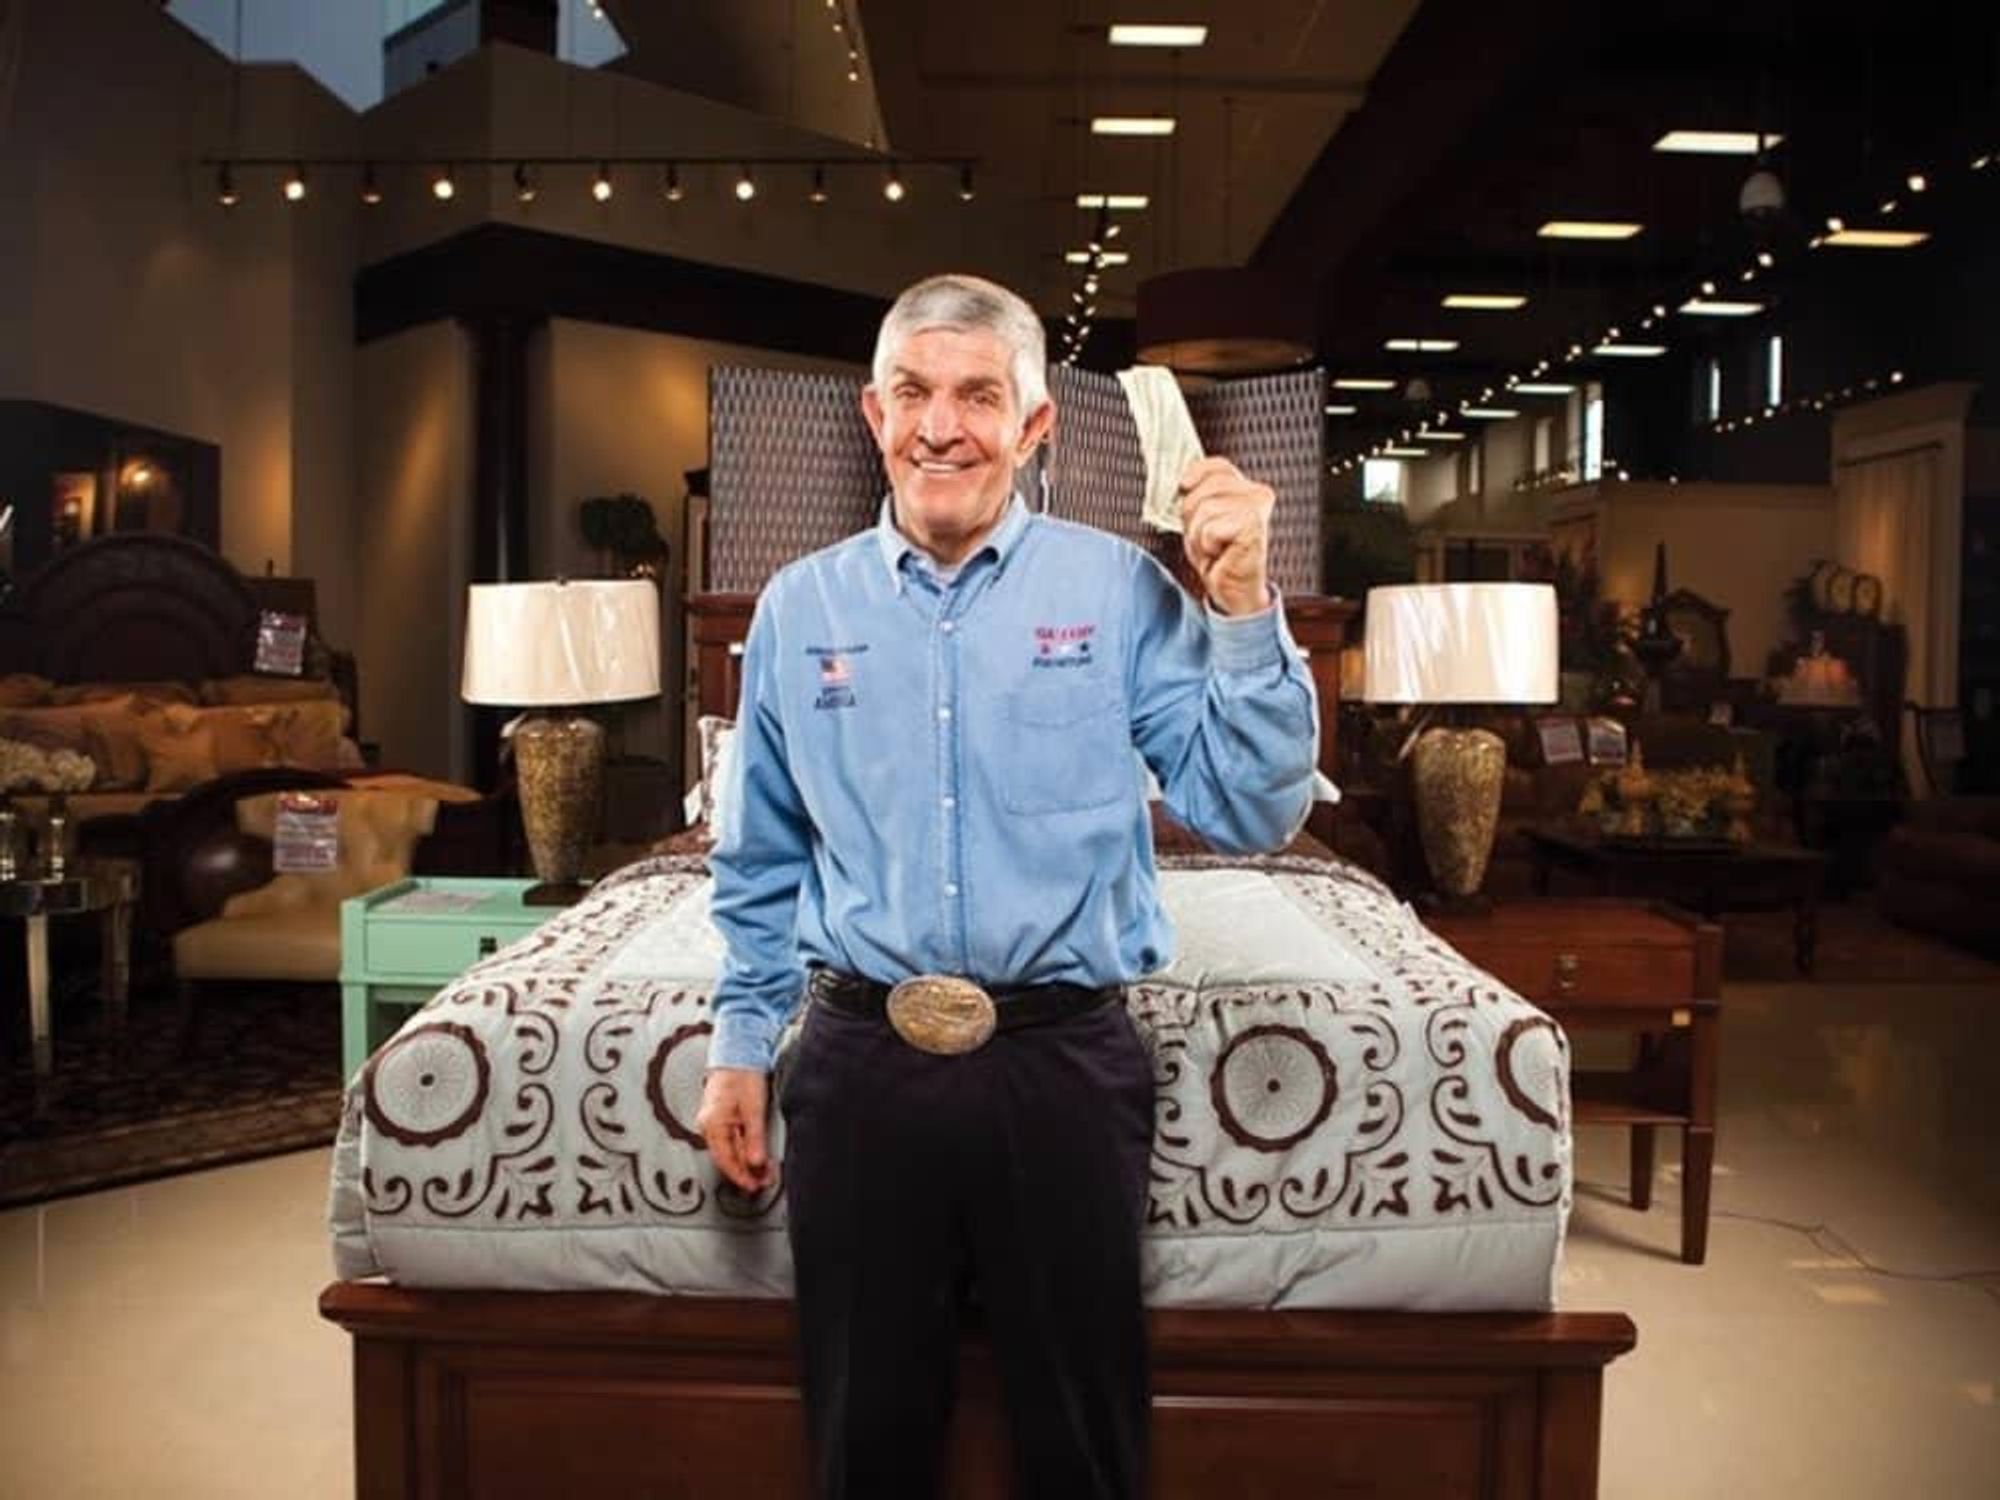 Mattress Mack exposes his hypocrisy with sports betting (Opinion)